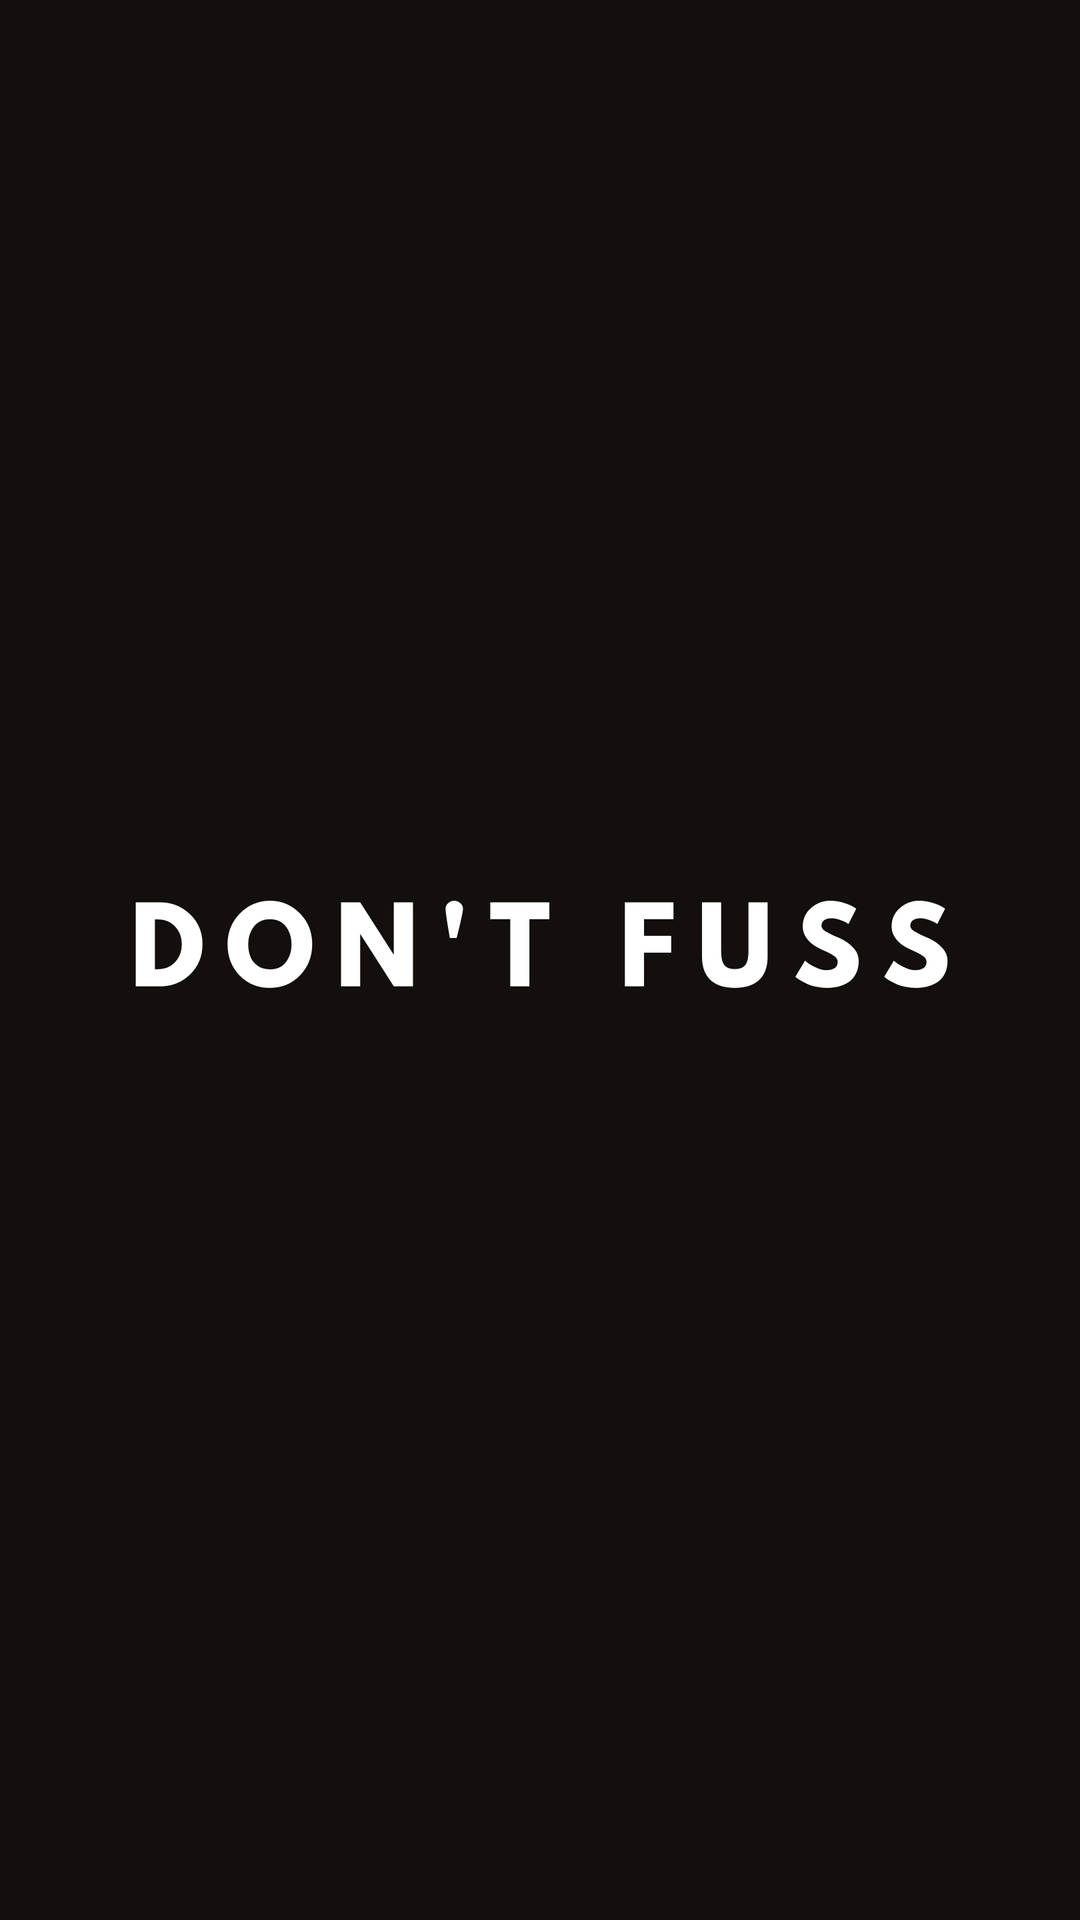 Don't Fuss Inspirational Quote Wallpaper